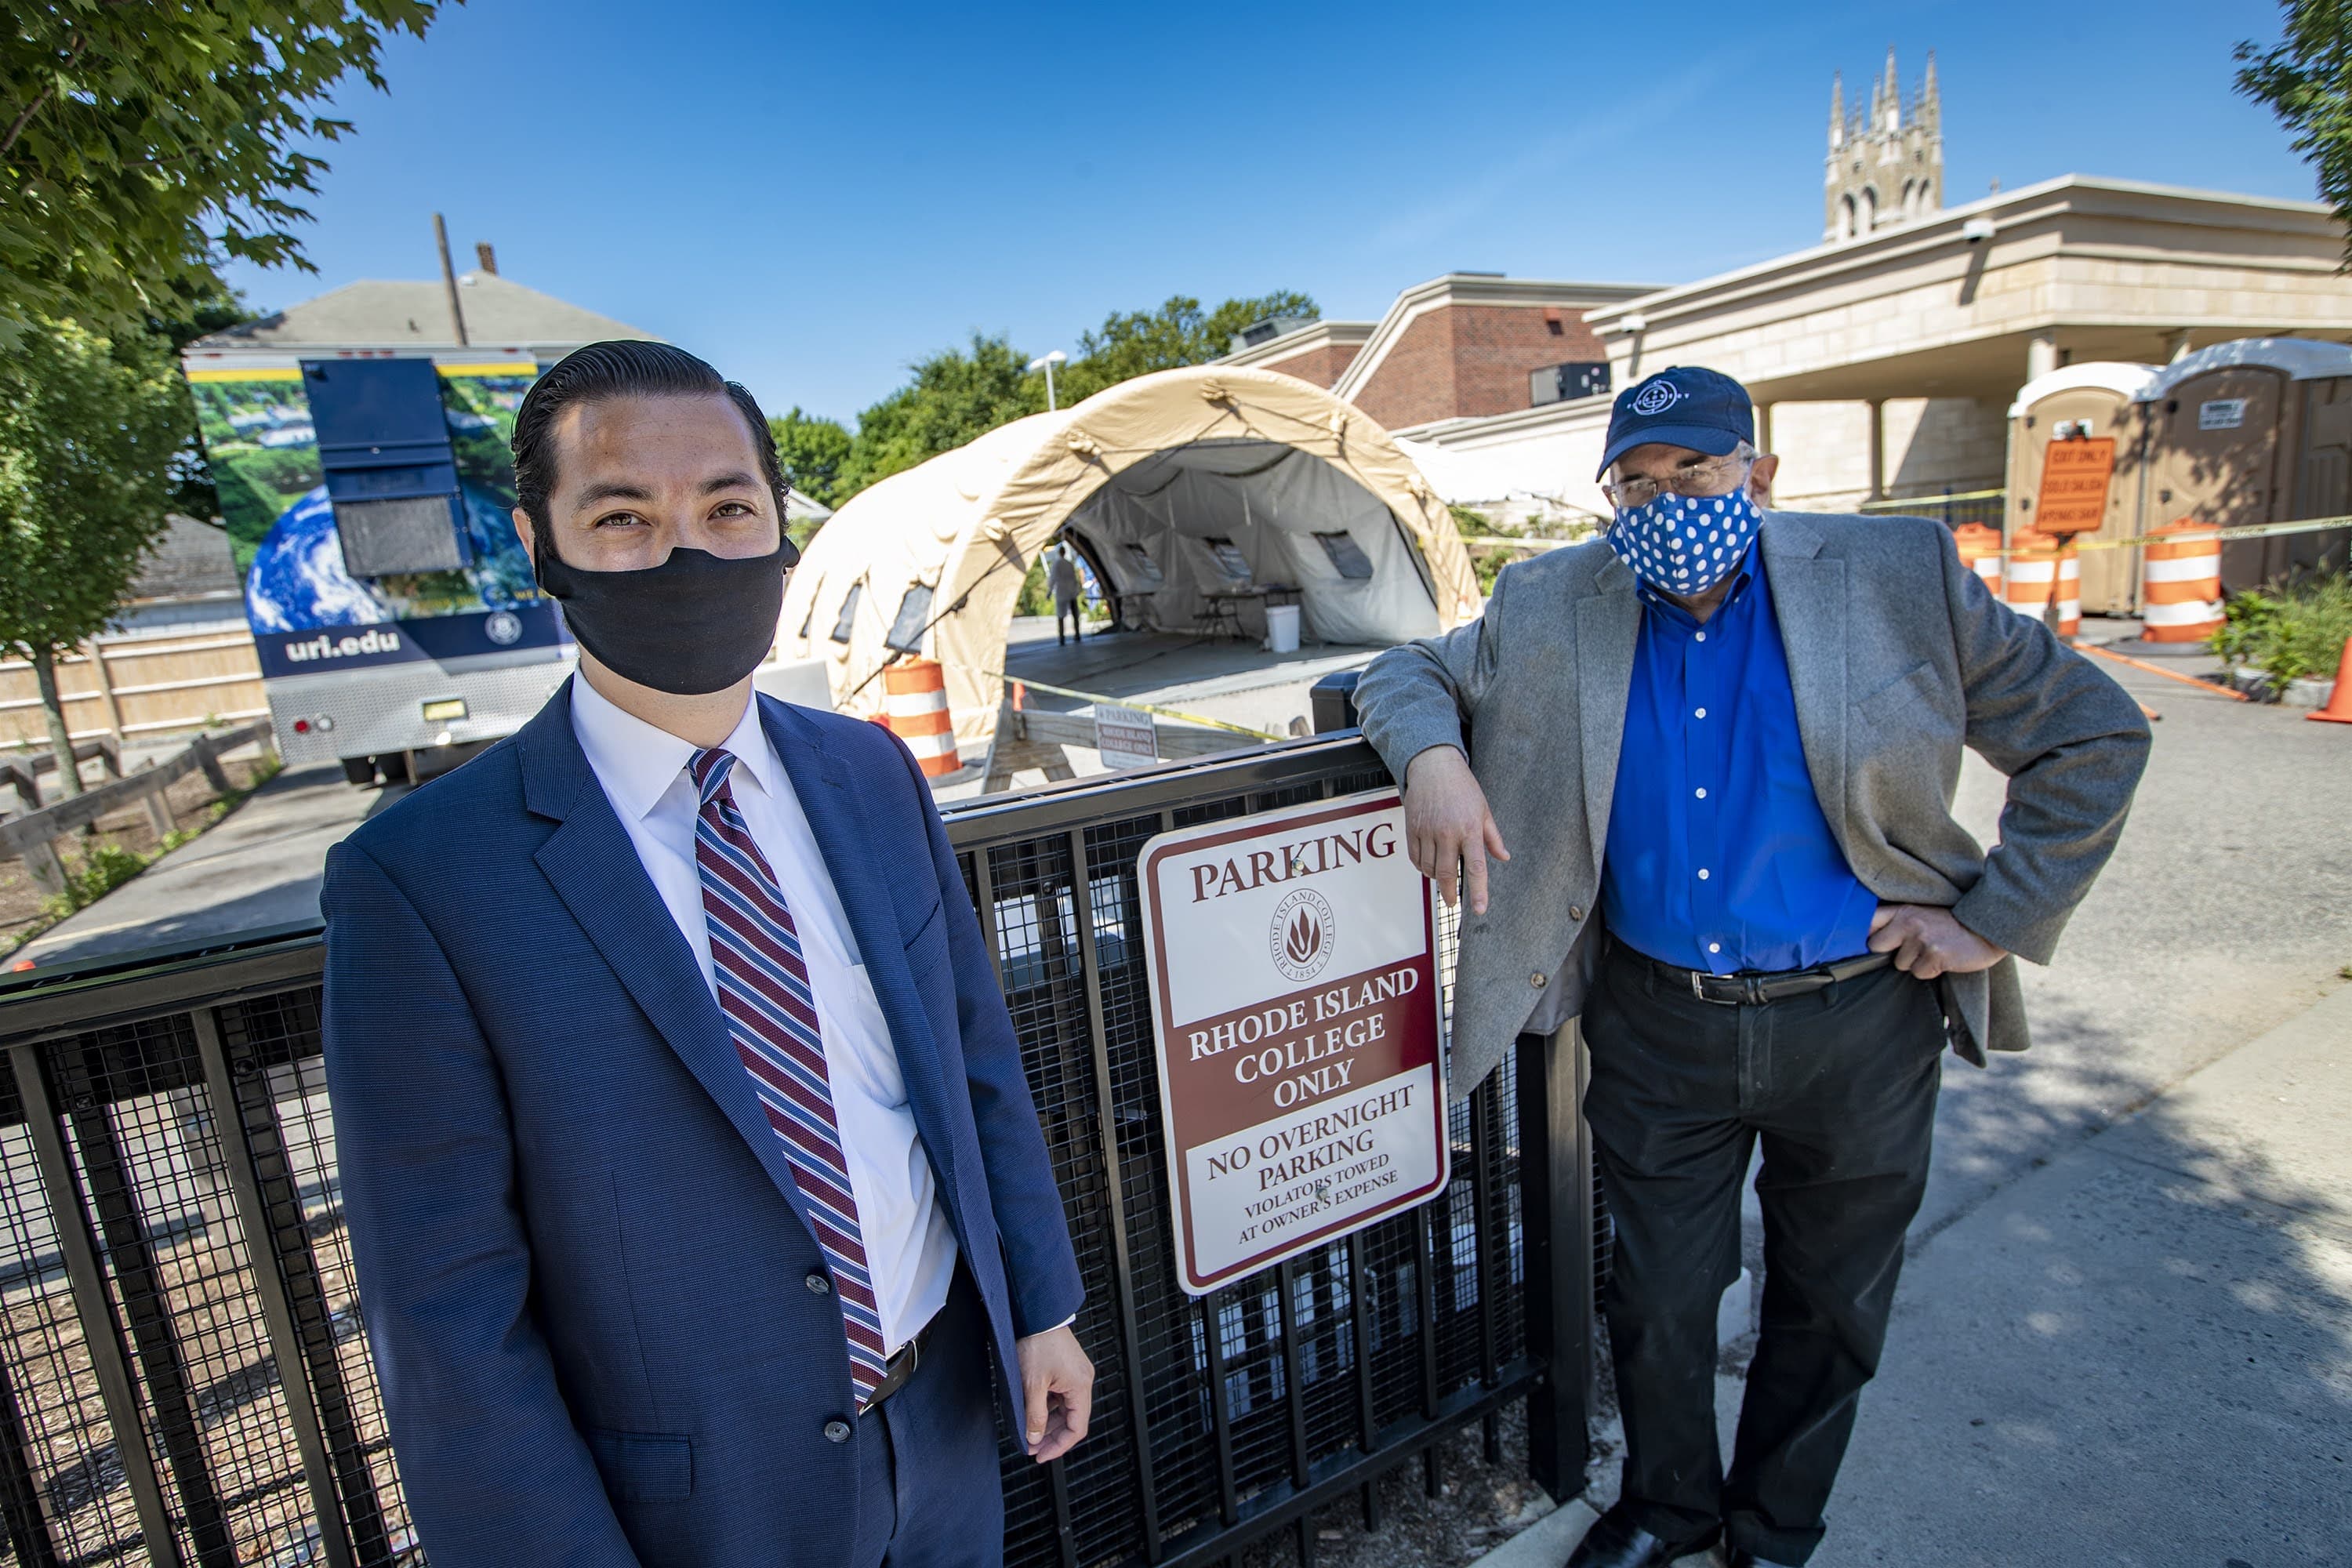 Central Falls Mayor James Diossa, left, and Dr. Michael Fine stand in front of the Rhode Island College walk-up testing site in Central Falls. (Jesse Costa/WBUR)